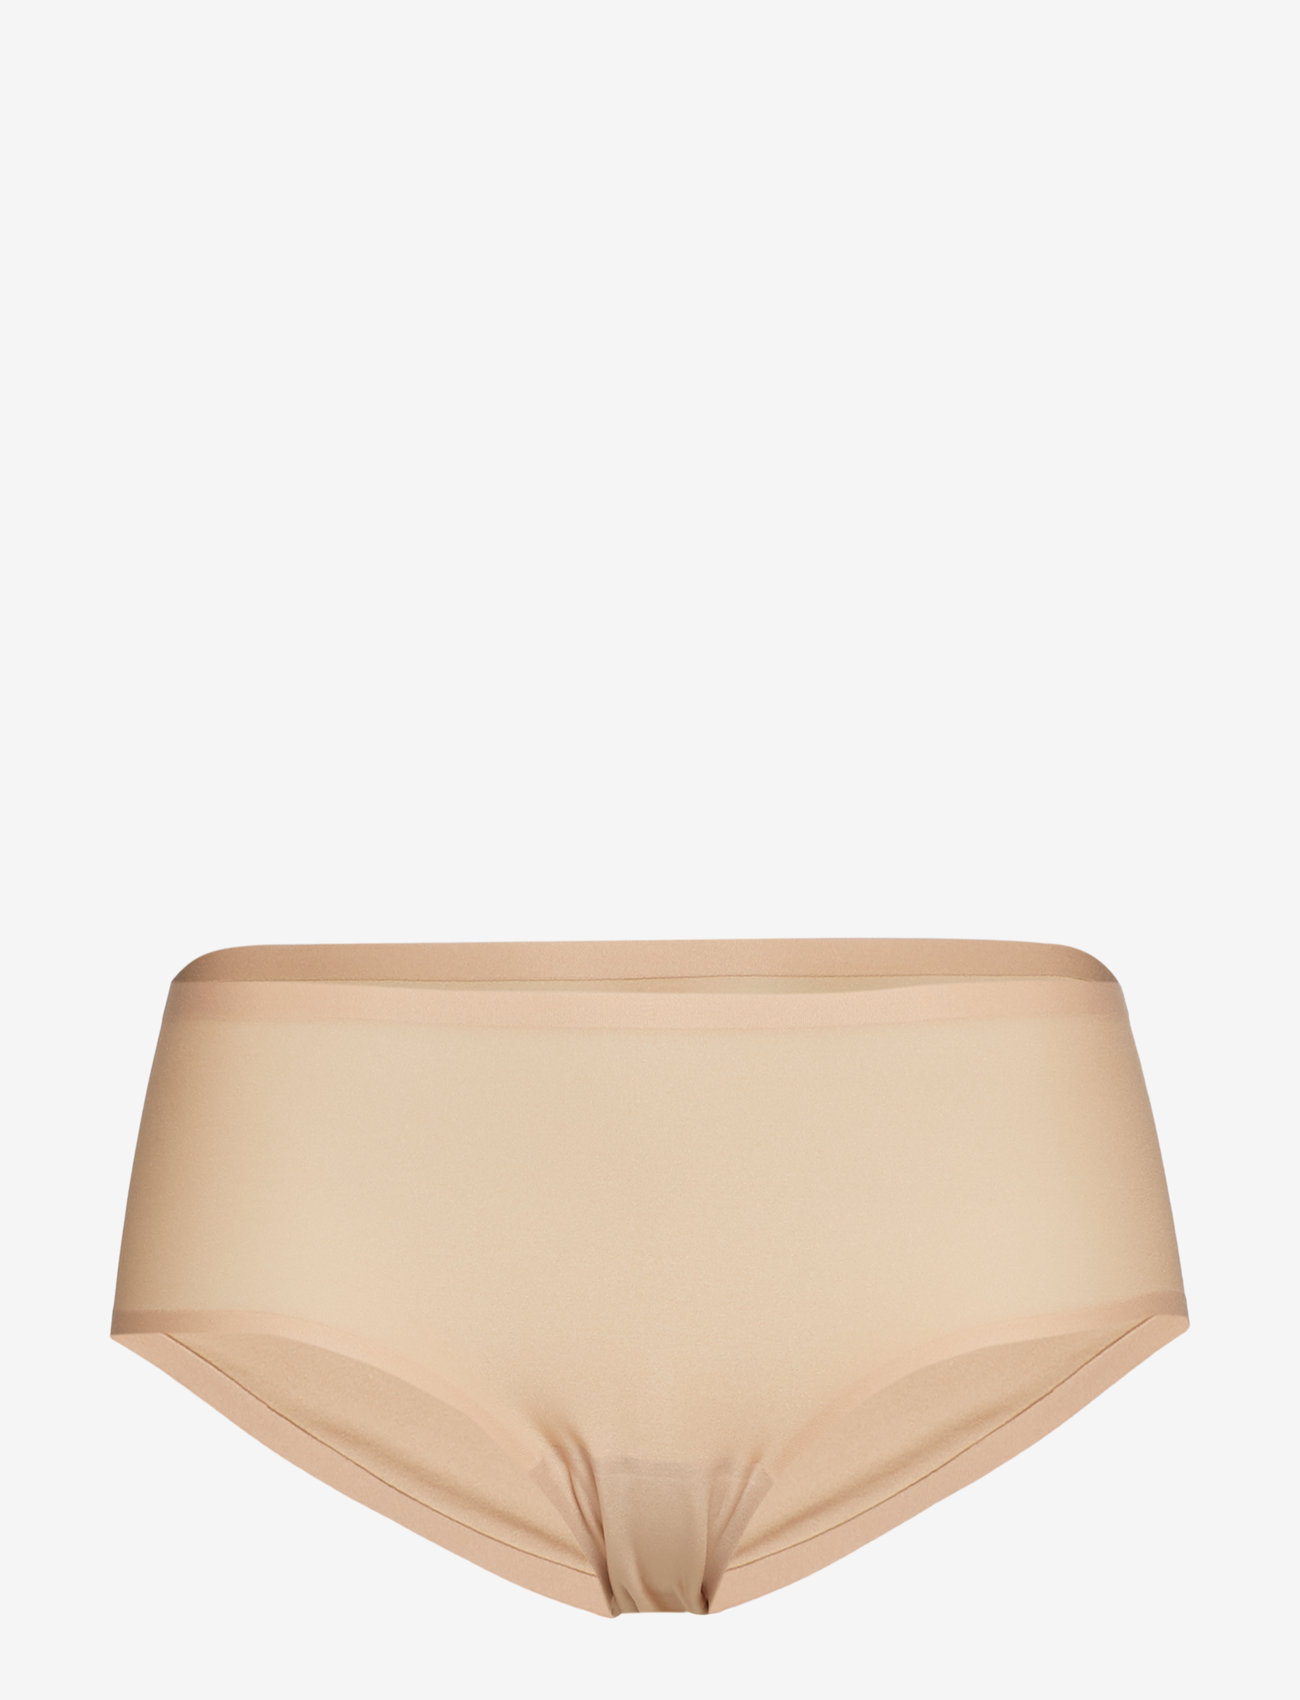 CHANTELLE - Soft Stretch Hipster Brief - culottes taille basse - nude - 0